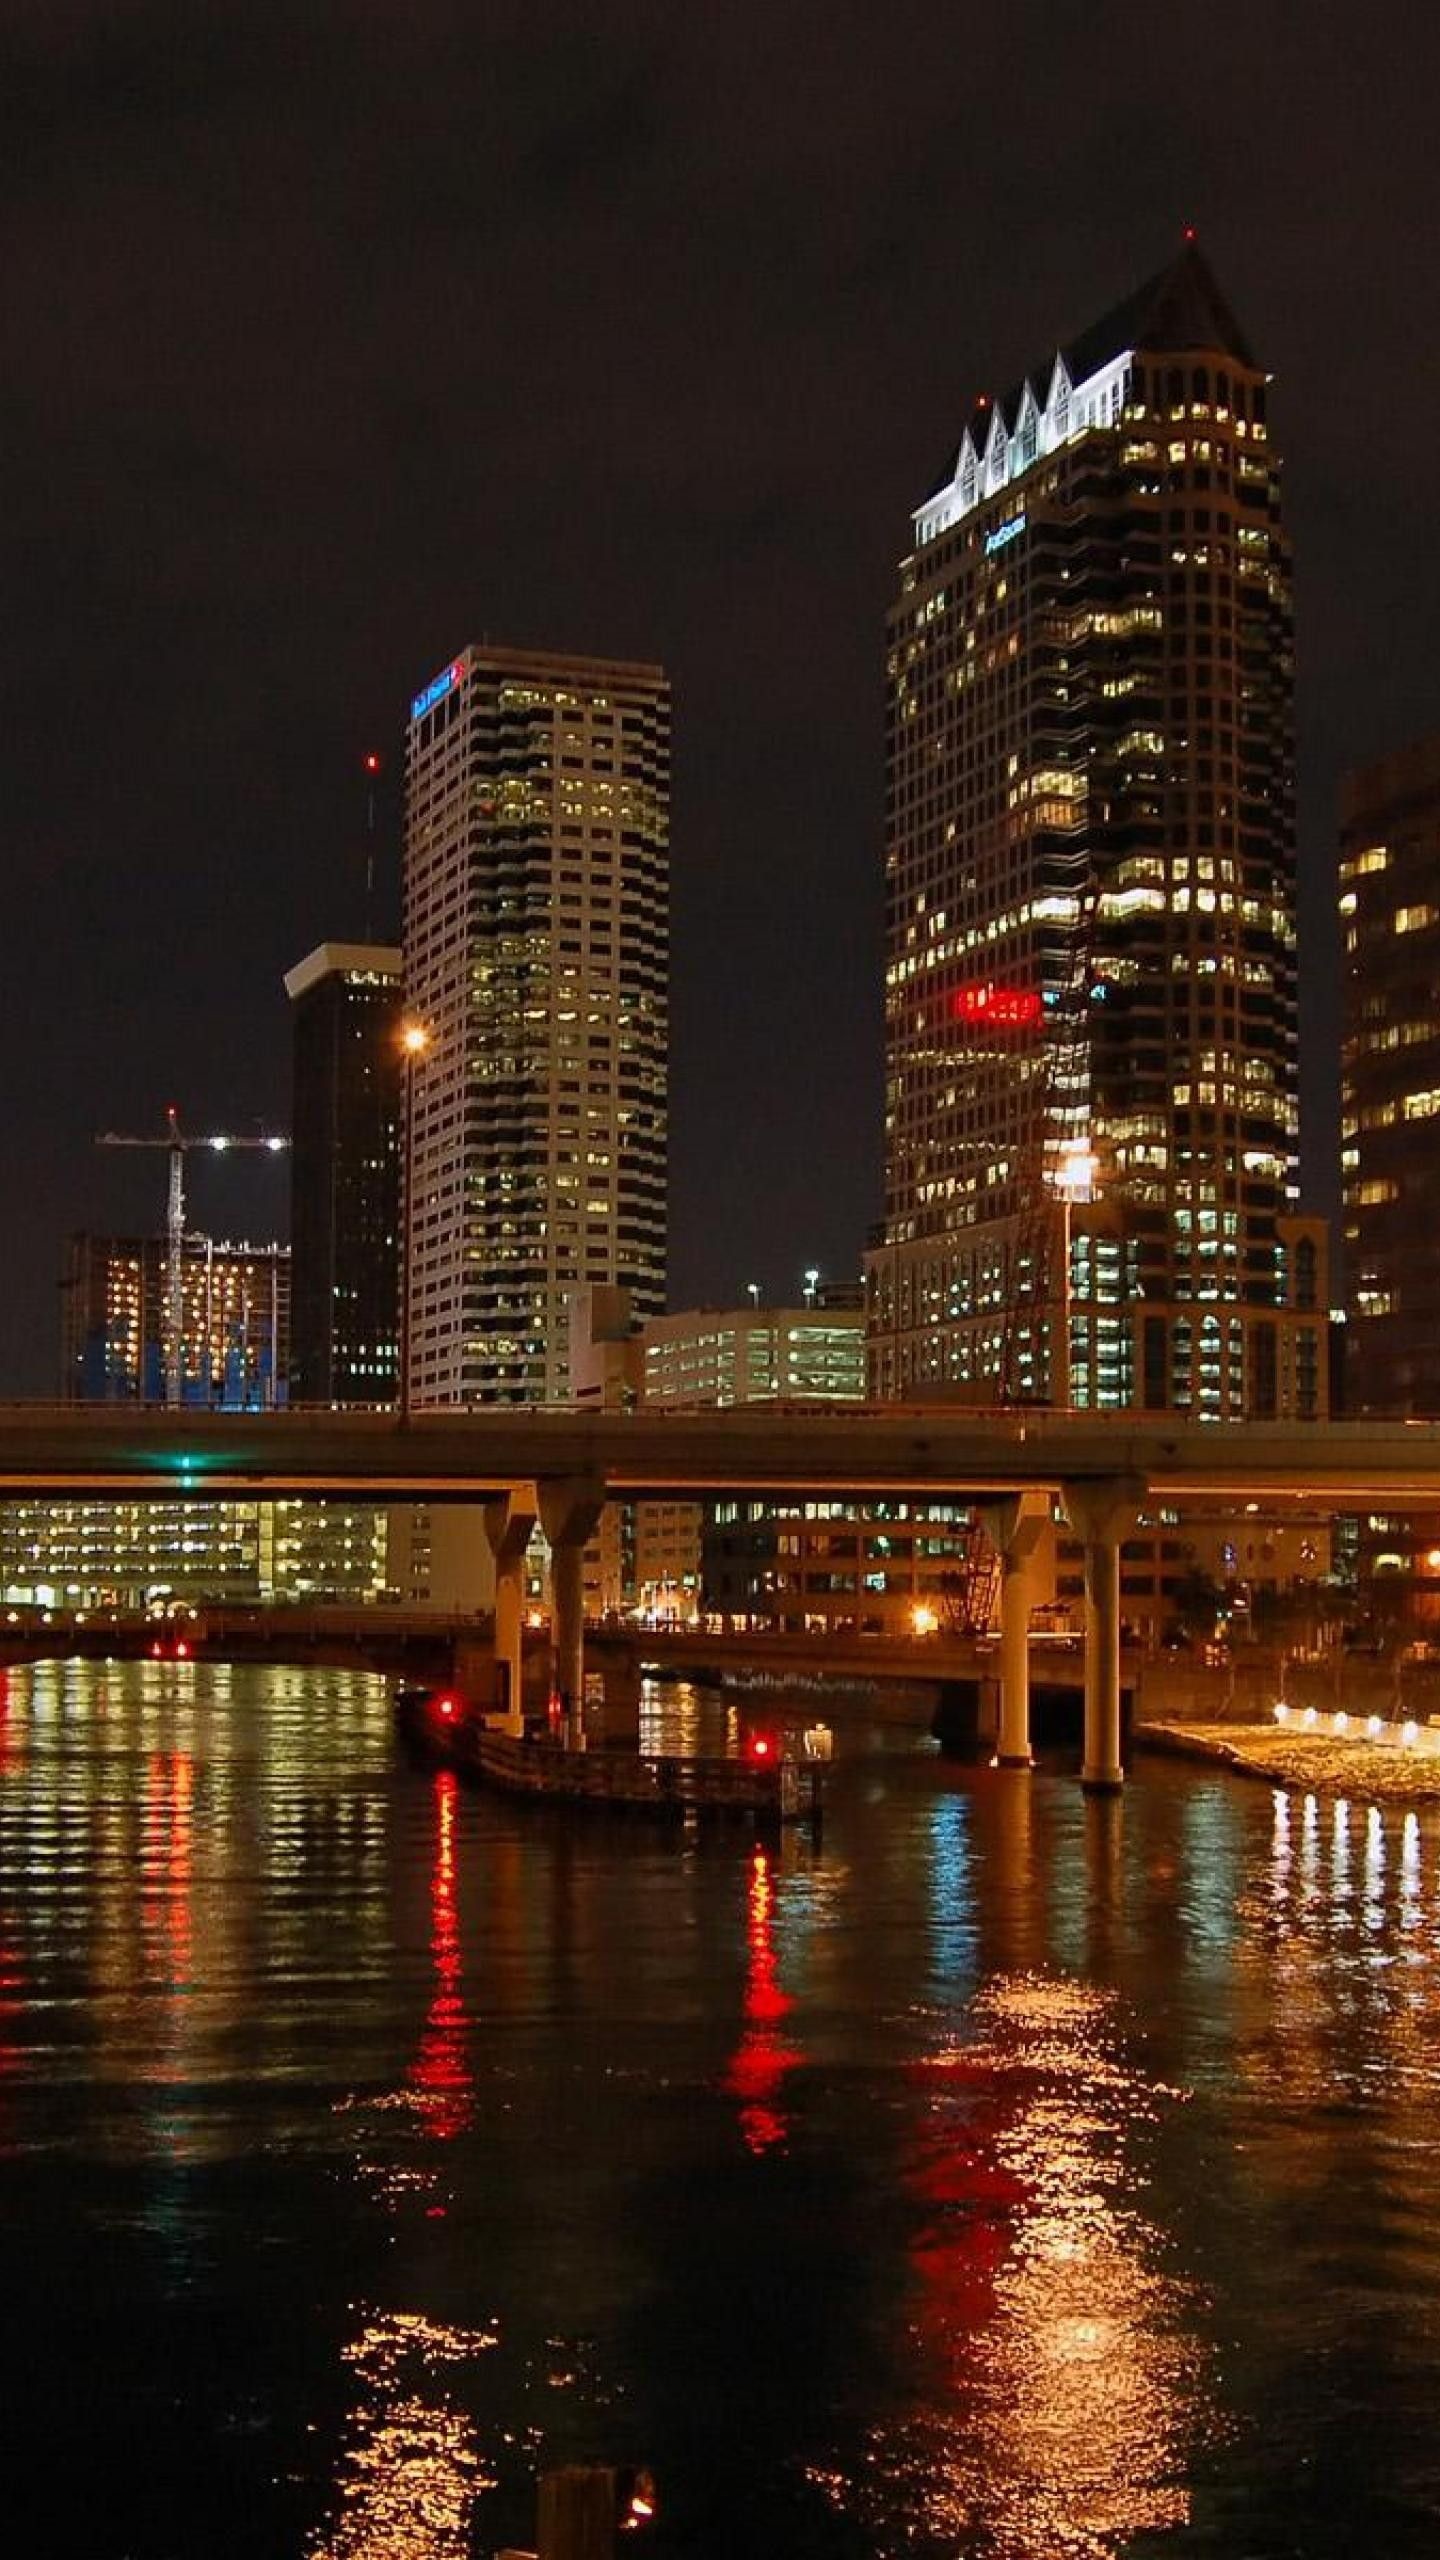 Florida: Tampa, The largest city in the Tampa Bay area and the seat of Hillsborough County. 1440x2560 HD Wallpaper.